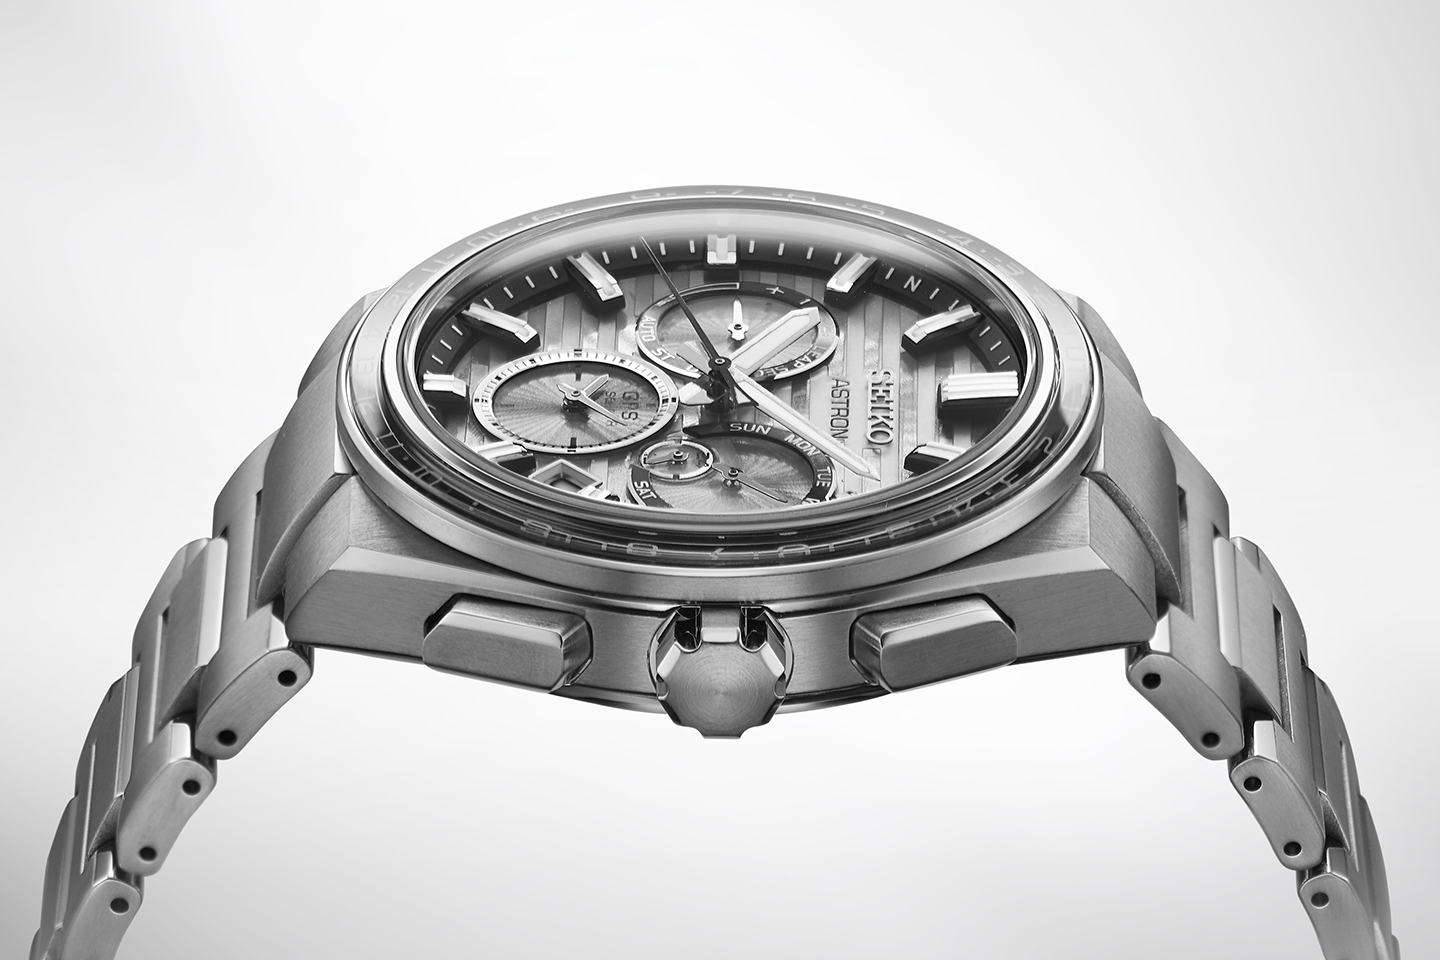 Photo : The GPS Solar Astron 10th Anniversary Limited Edition